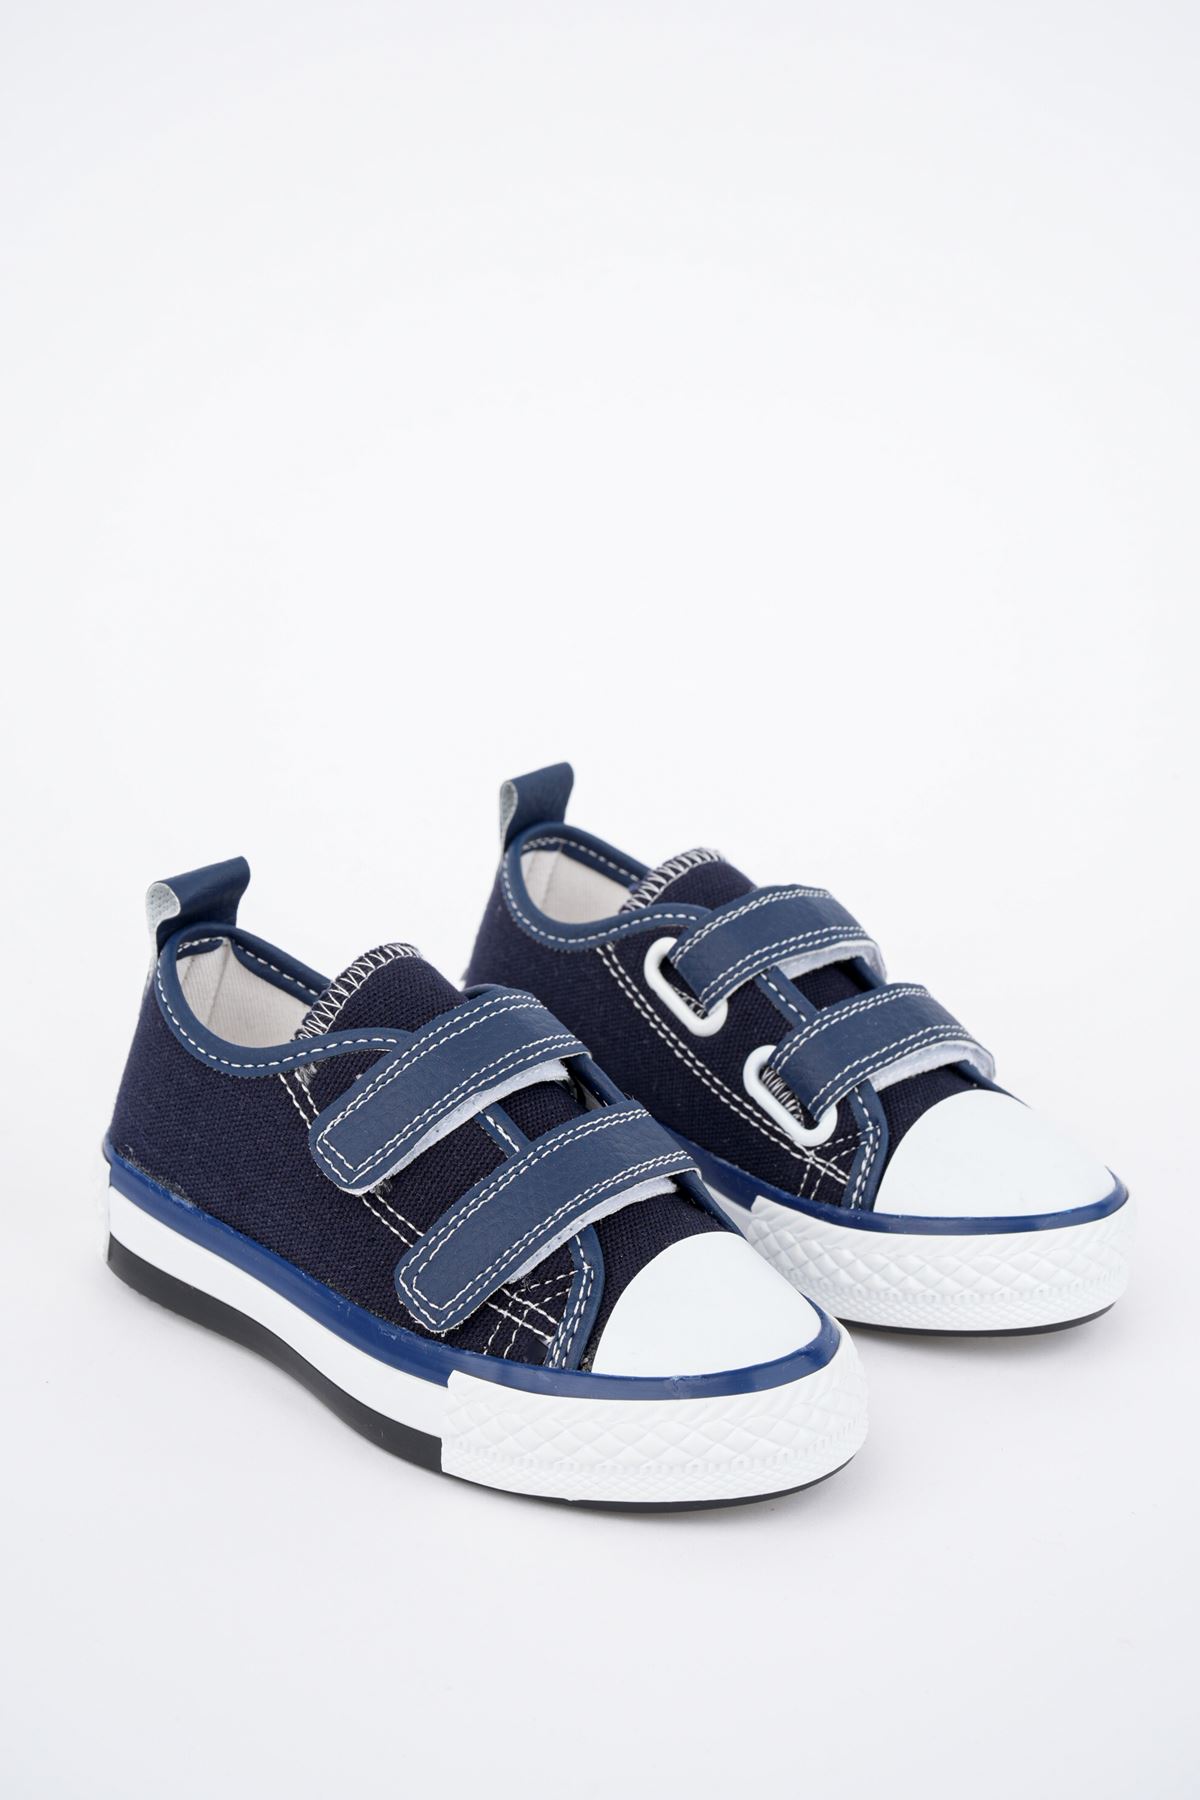 Double Velcro Navy Blue Baby Shoes